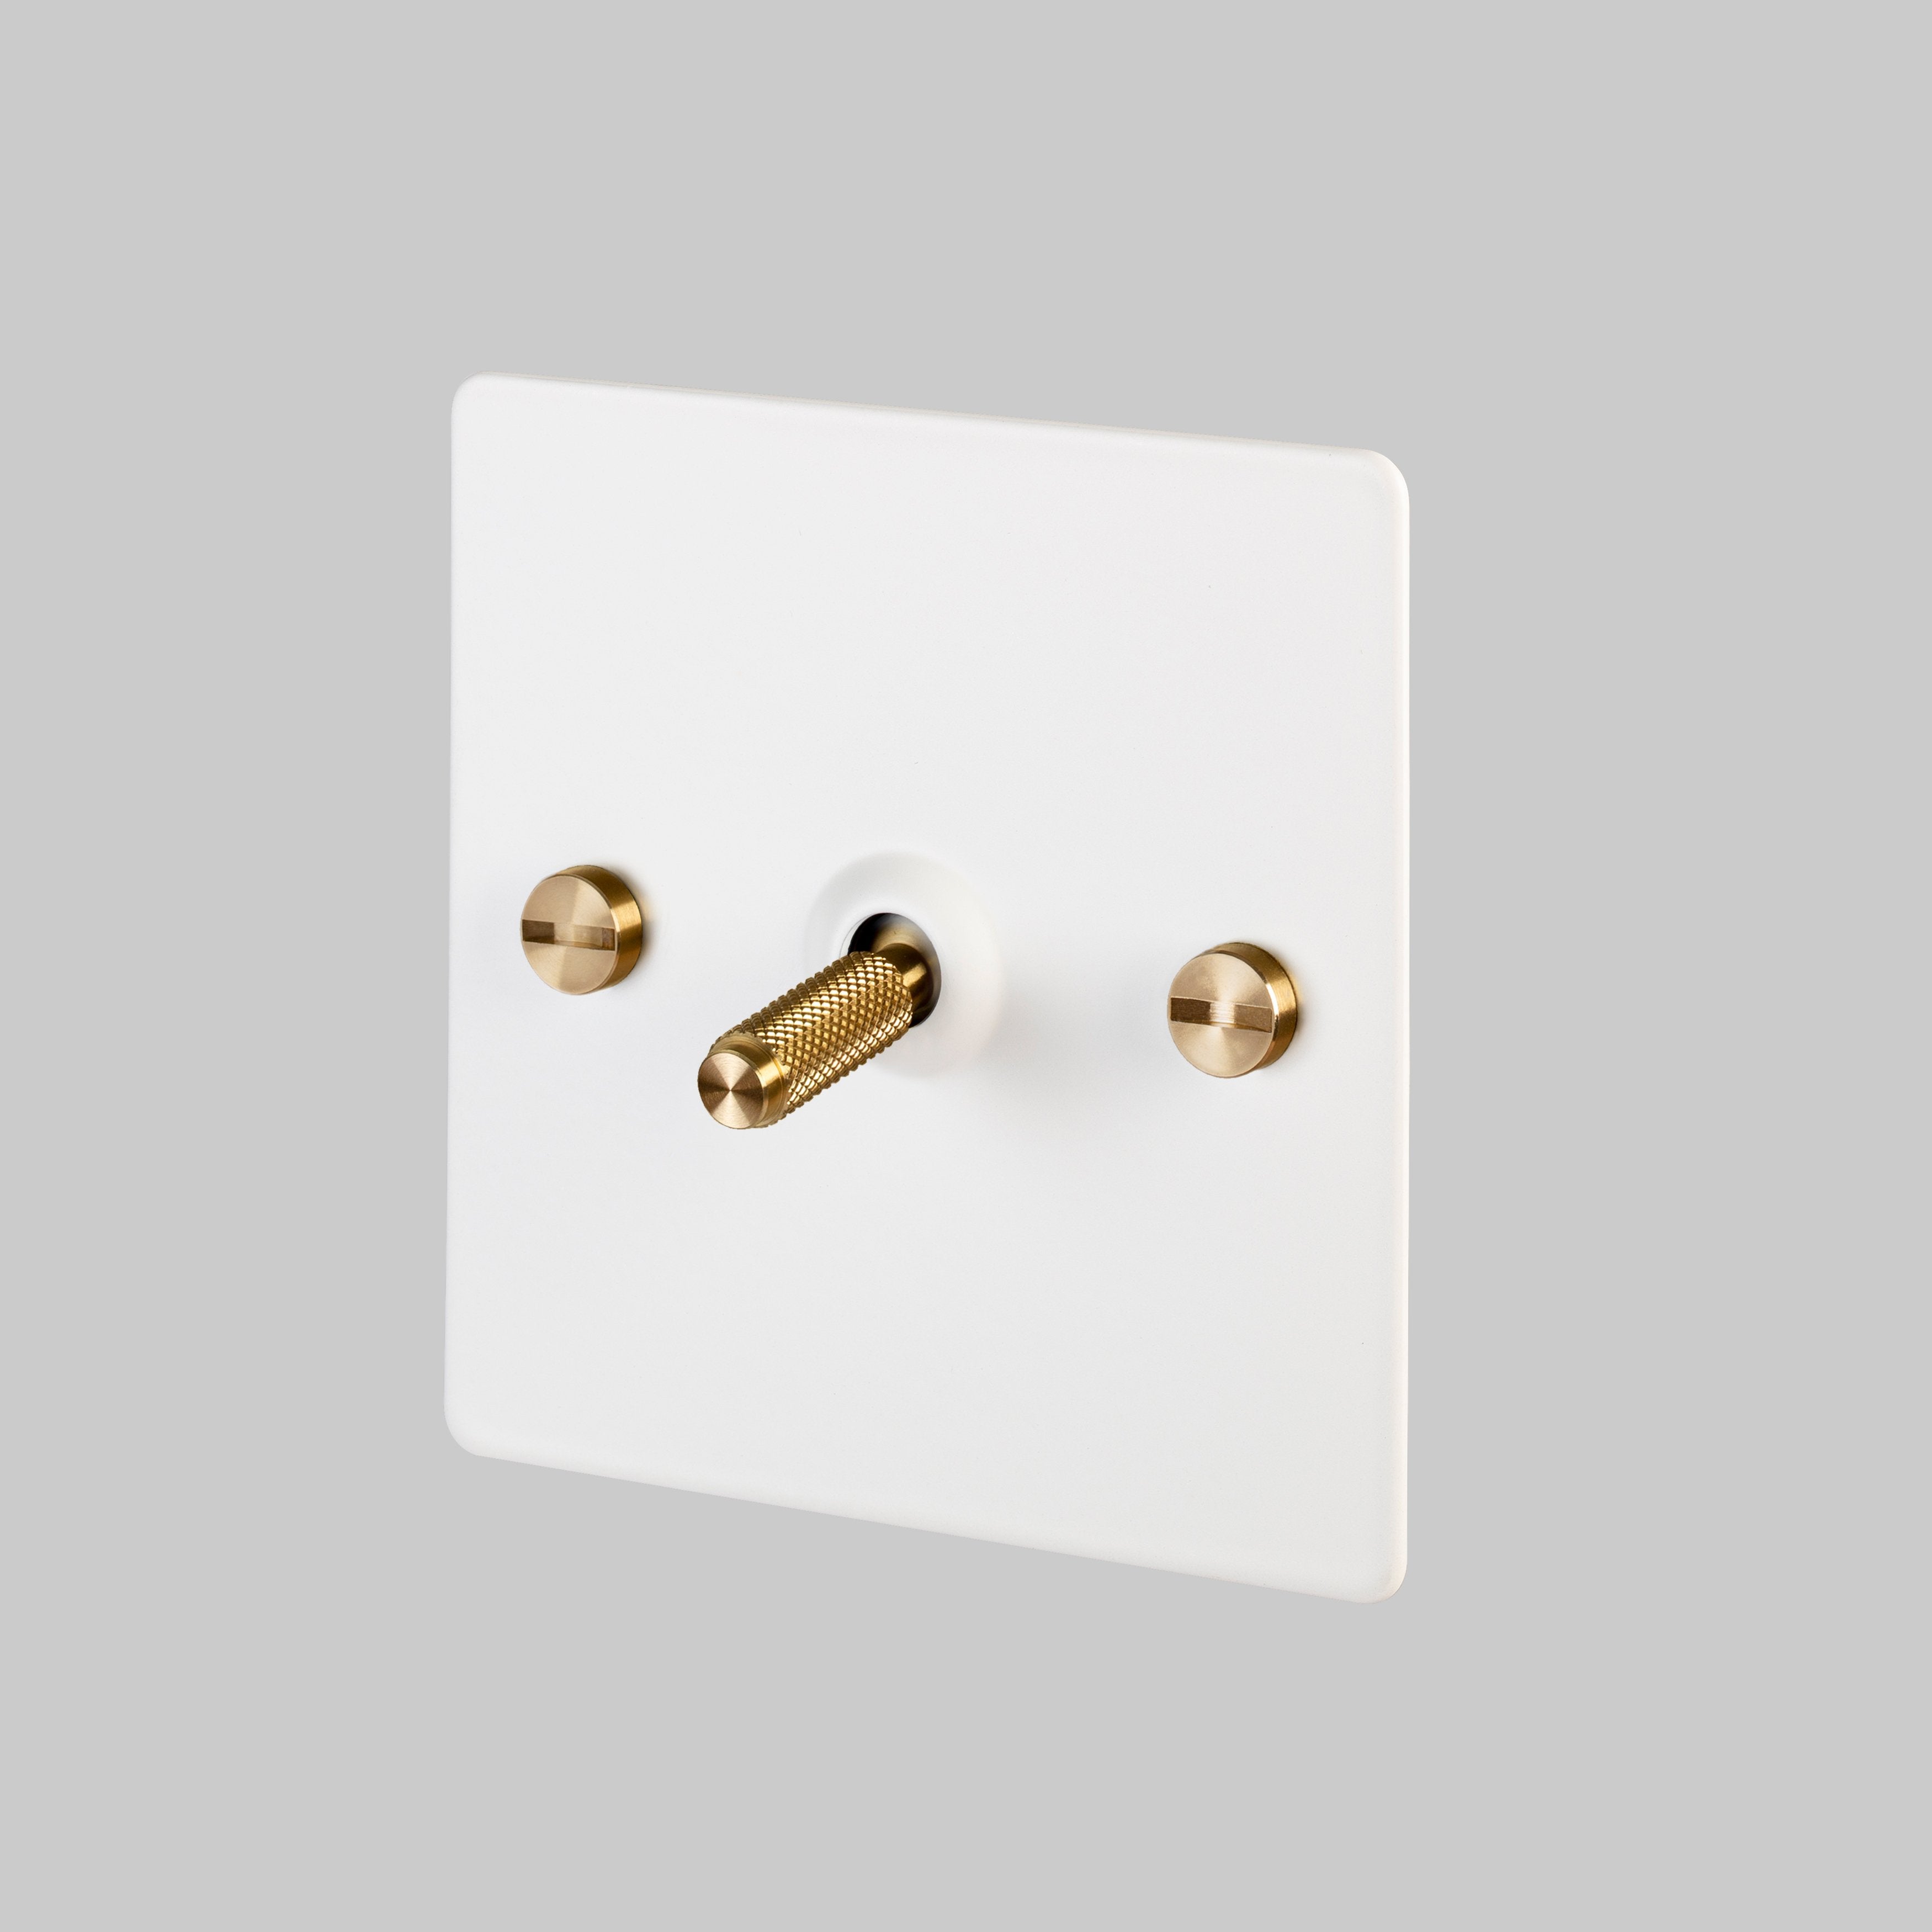 Buster and Punch 1G INTERMEDIATE TOGGLE SWITCH / WHITE / BRASS - No.42 Interiors